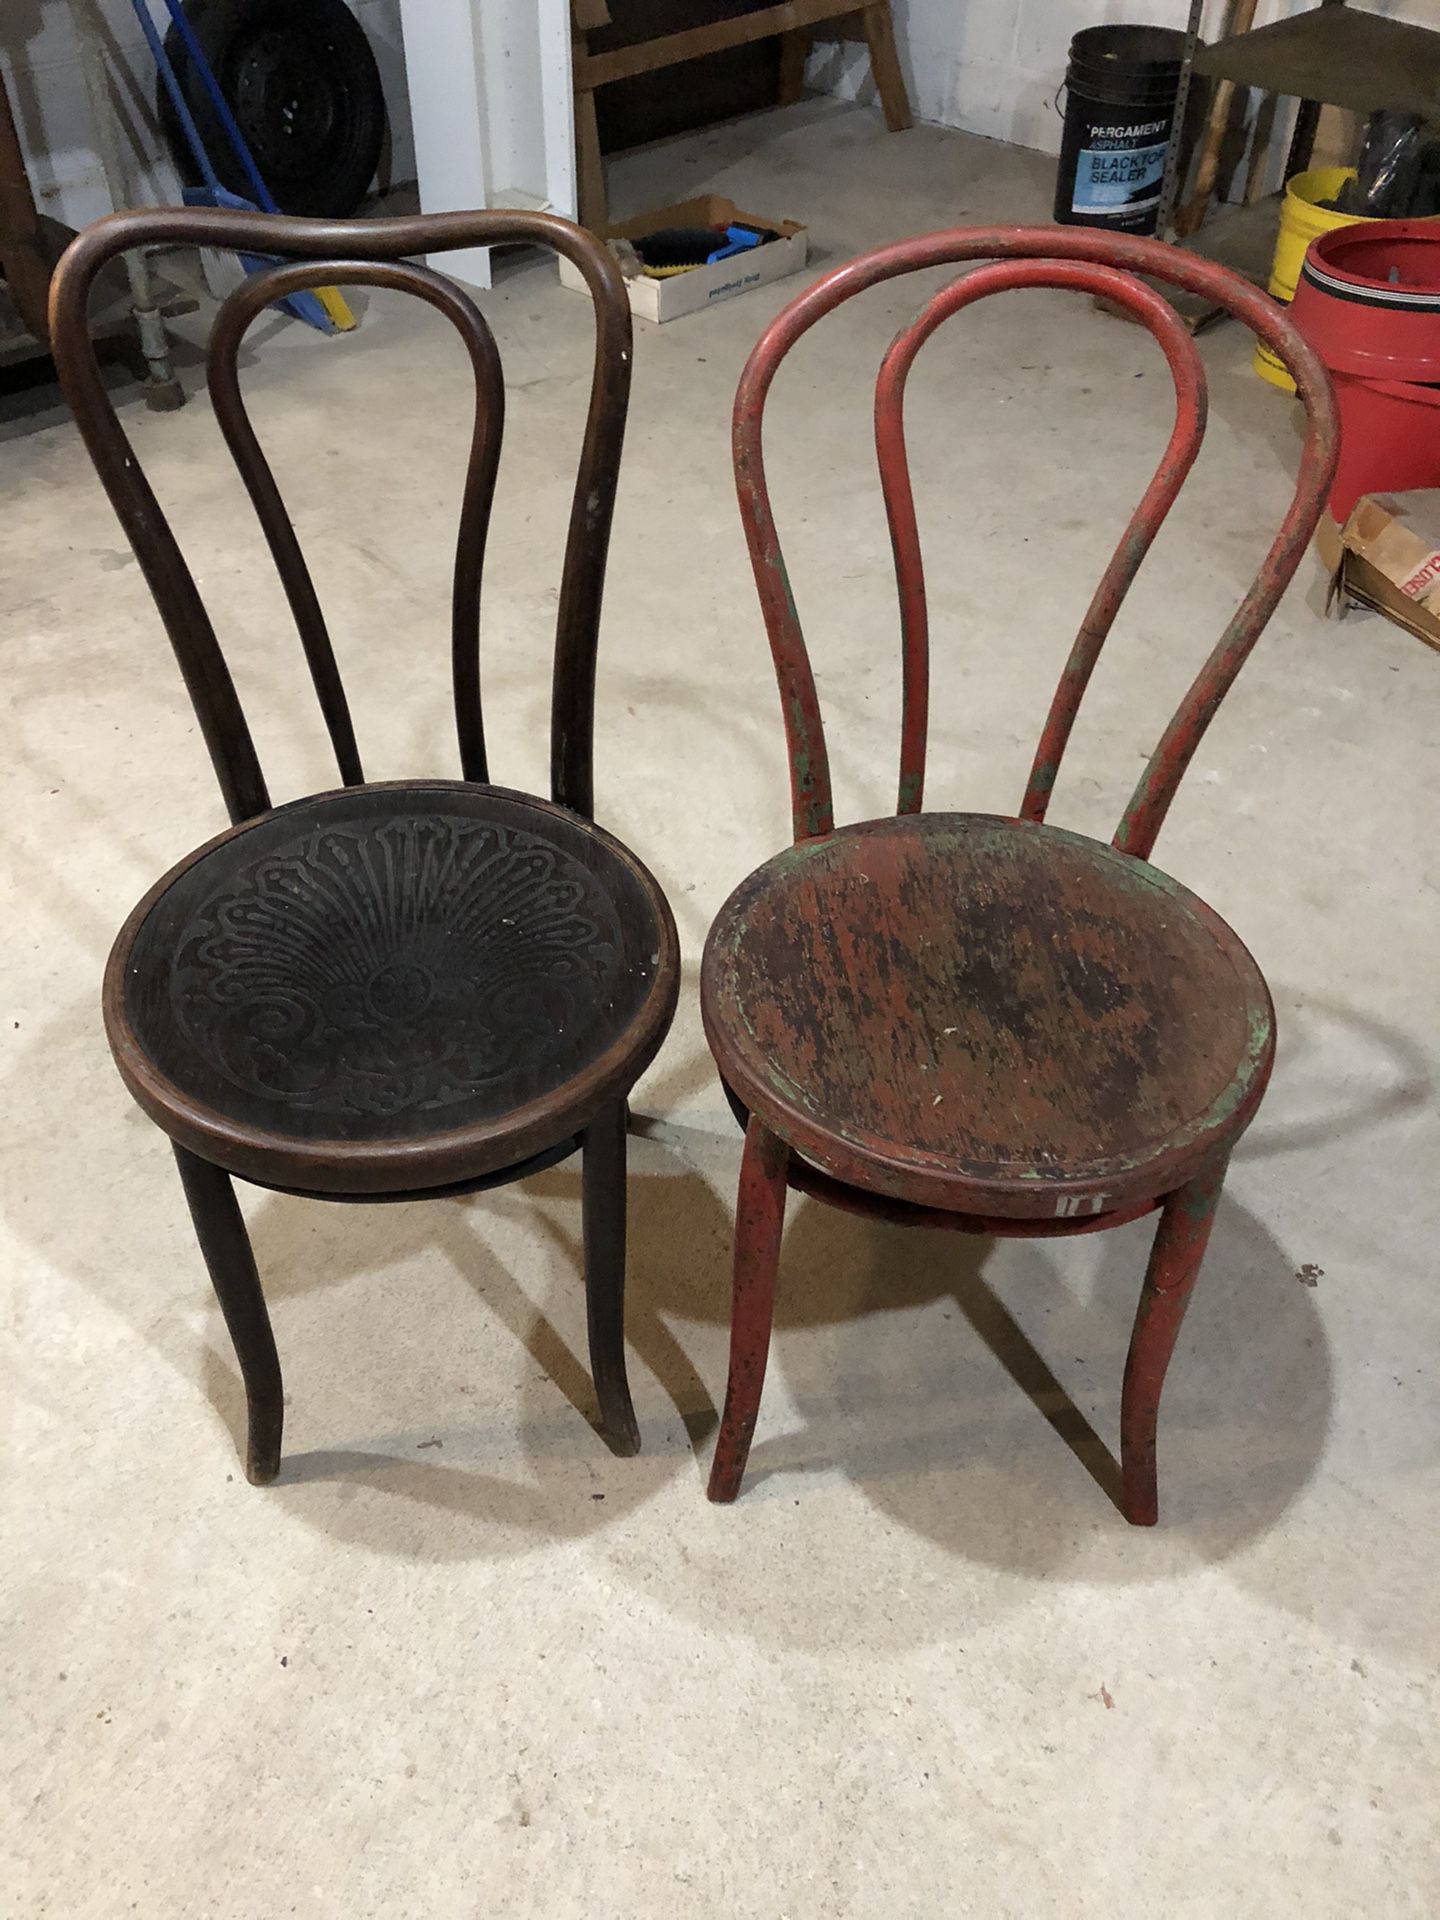 Antique Barroom Chairs